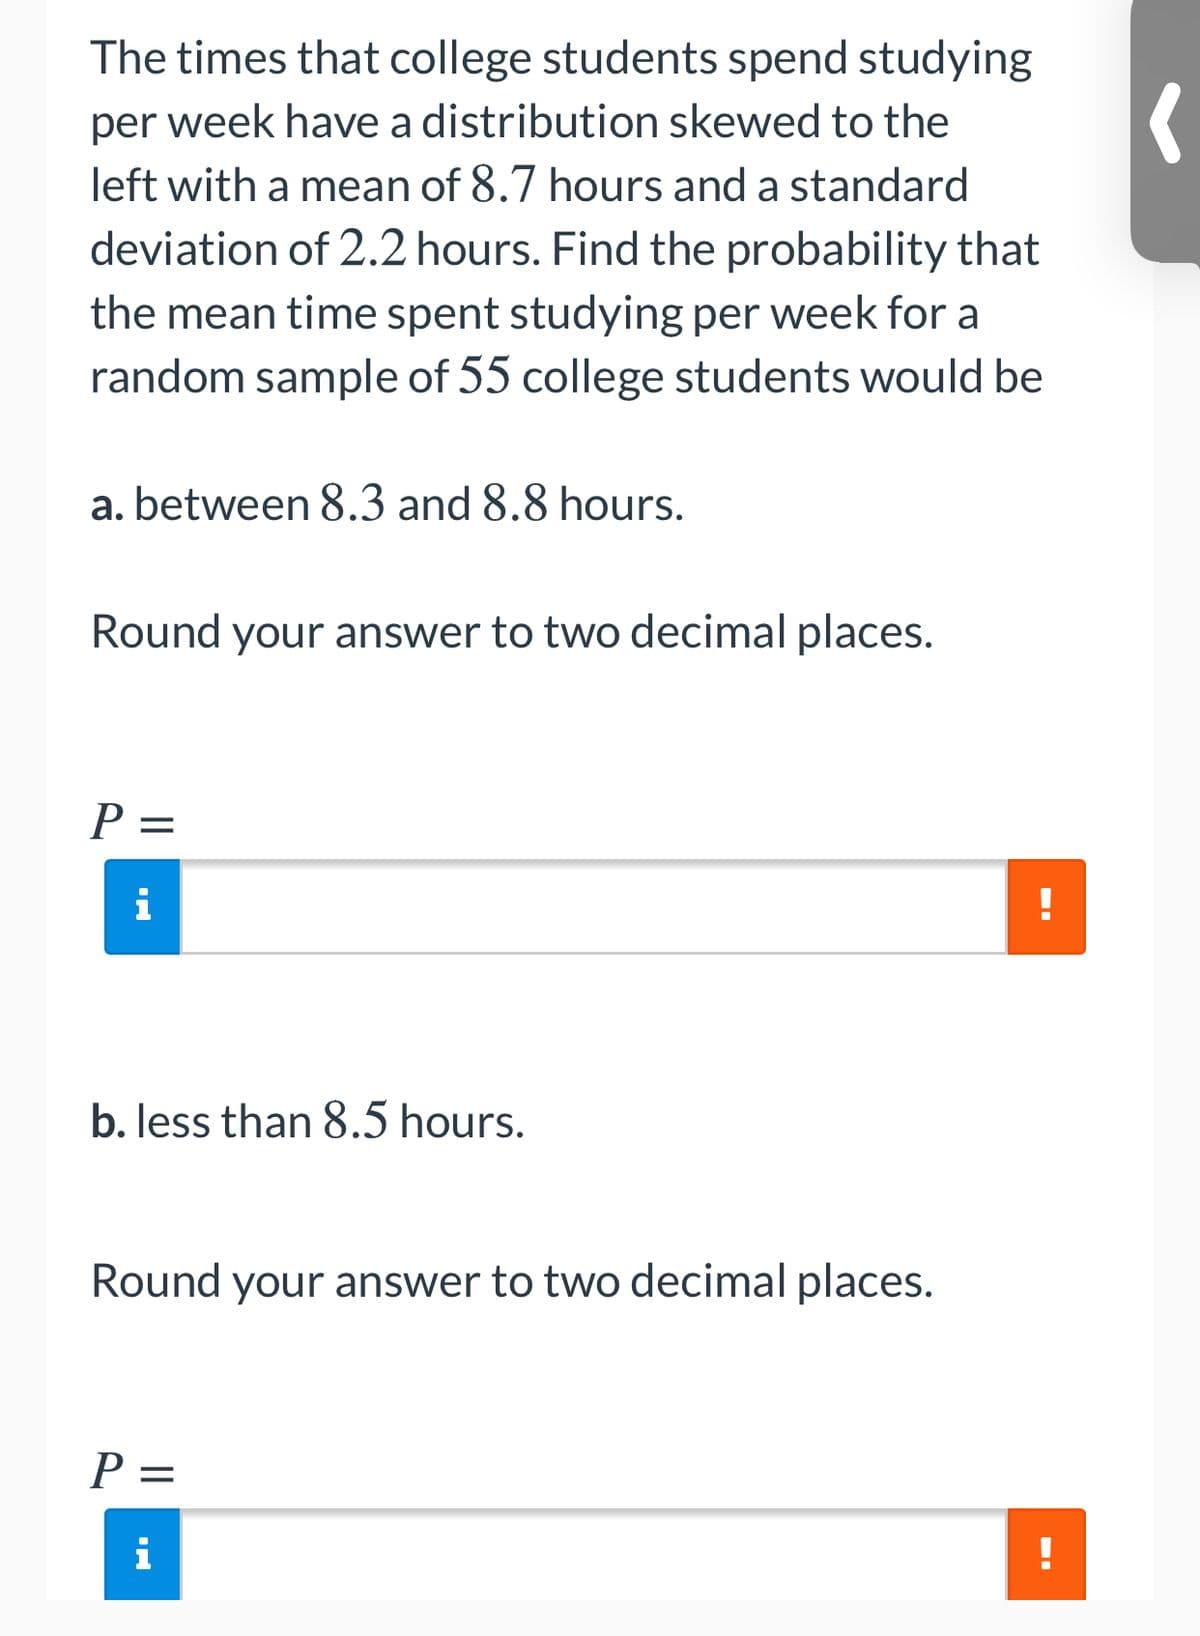 The times that college students spend studying
per week have a distribution skewed to the
left with a mean of 8.7 hours and a standard
deviation of 2.2 hours. Find the probability that
the mean time spent studying per week for a
random sample of 55 college students would be
a. between 8.3 and 8.8 hours.
Round your answer to two decimal places.
P =
b. less than 8.5 hours.
Round your answer to two decimal places.
P =
|D
i
